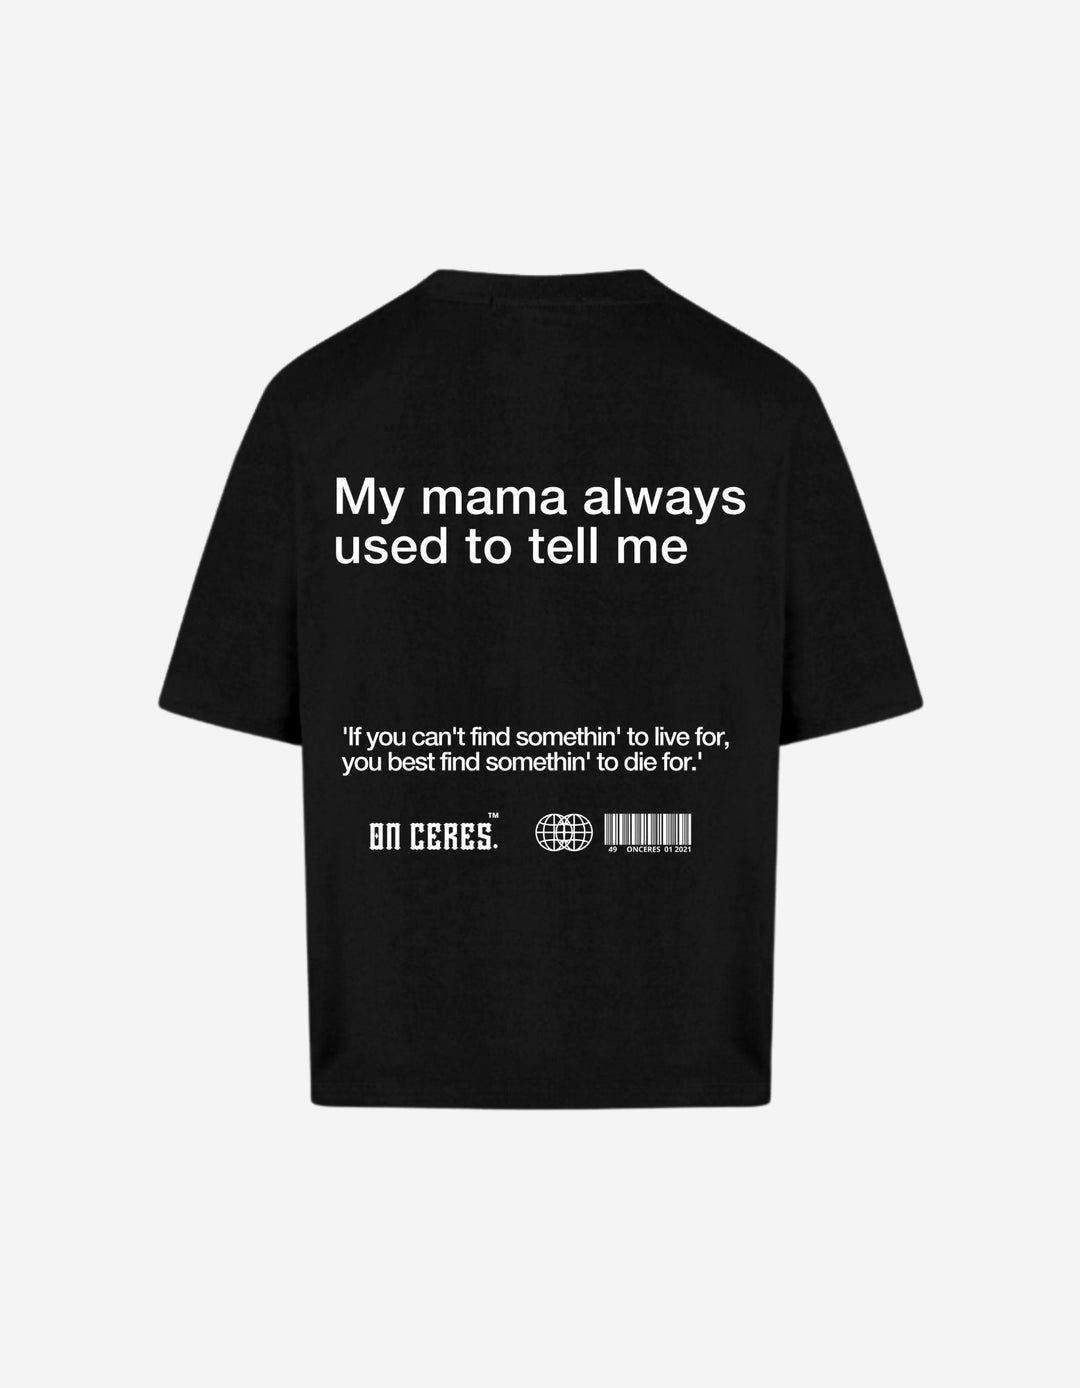 My Mama - Onceres™